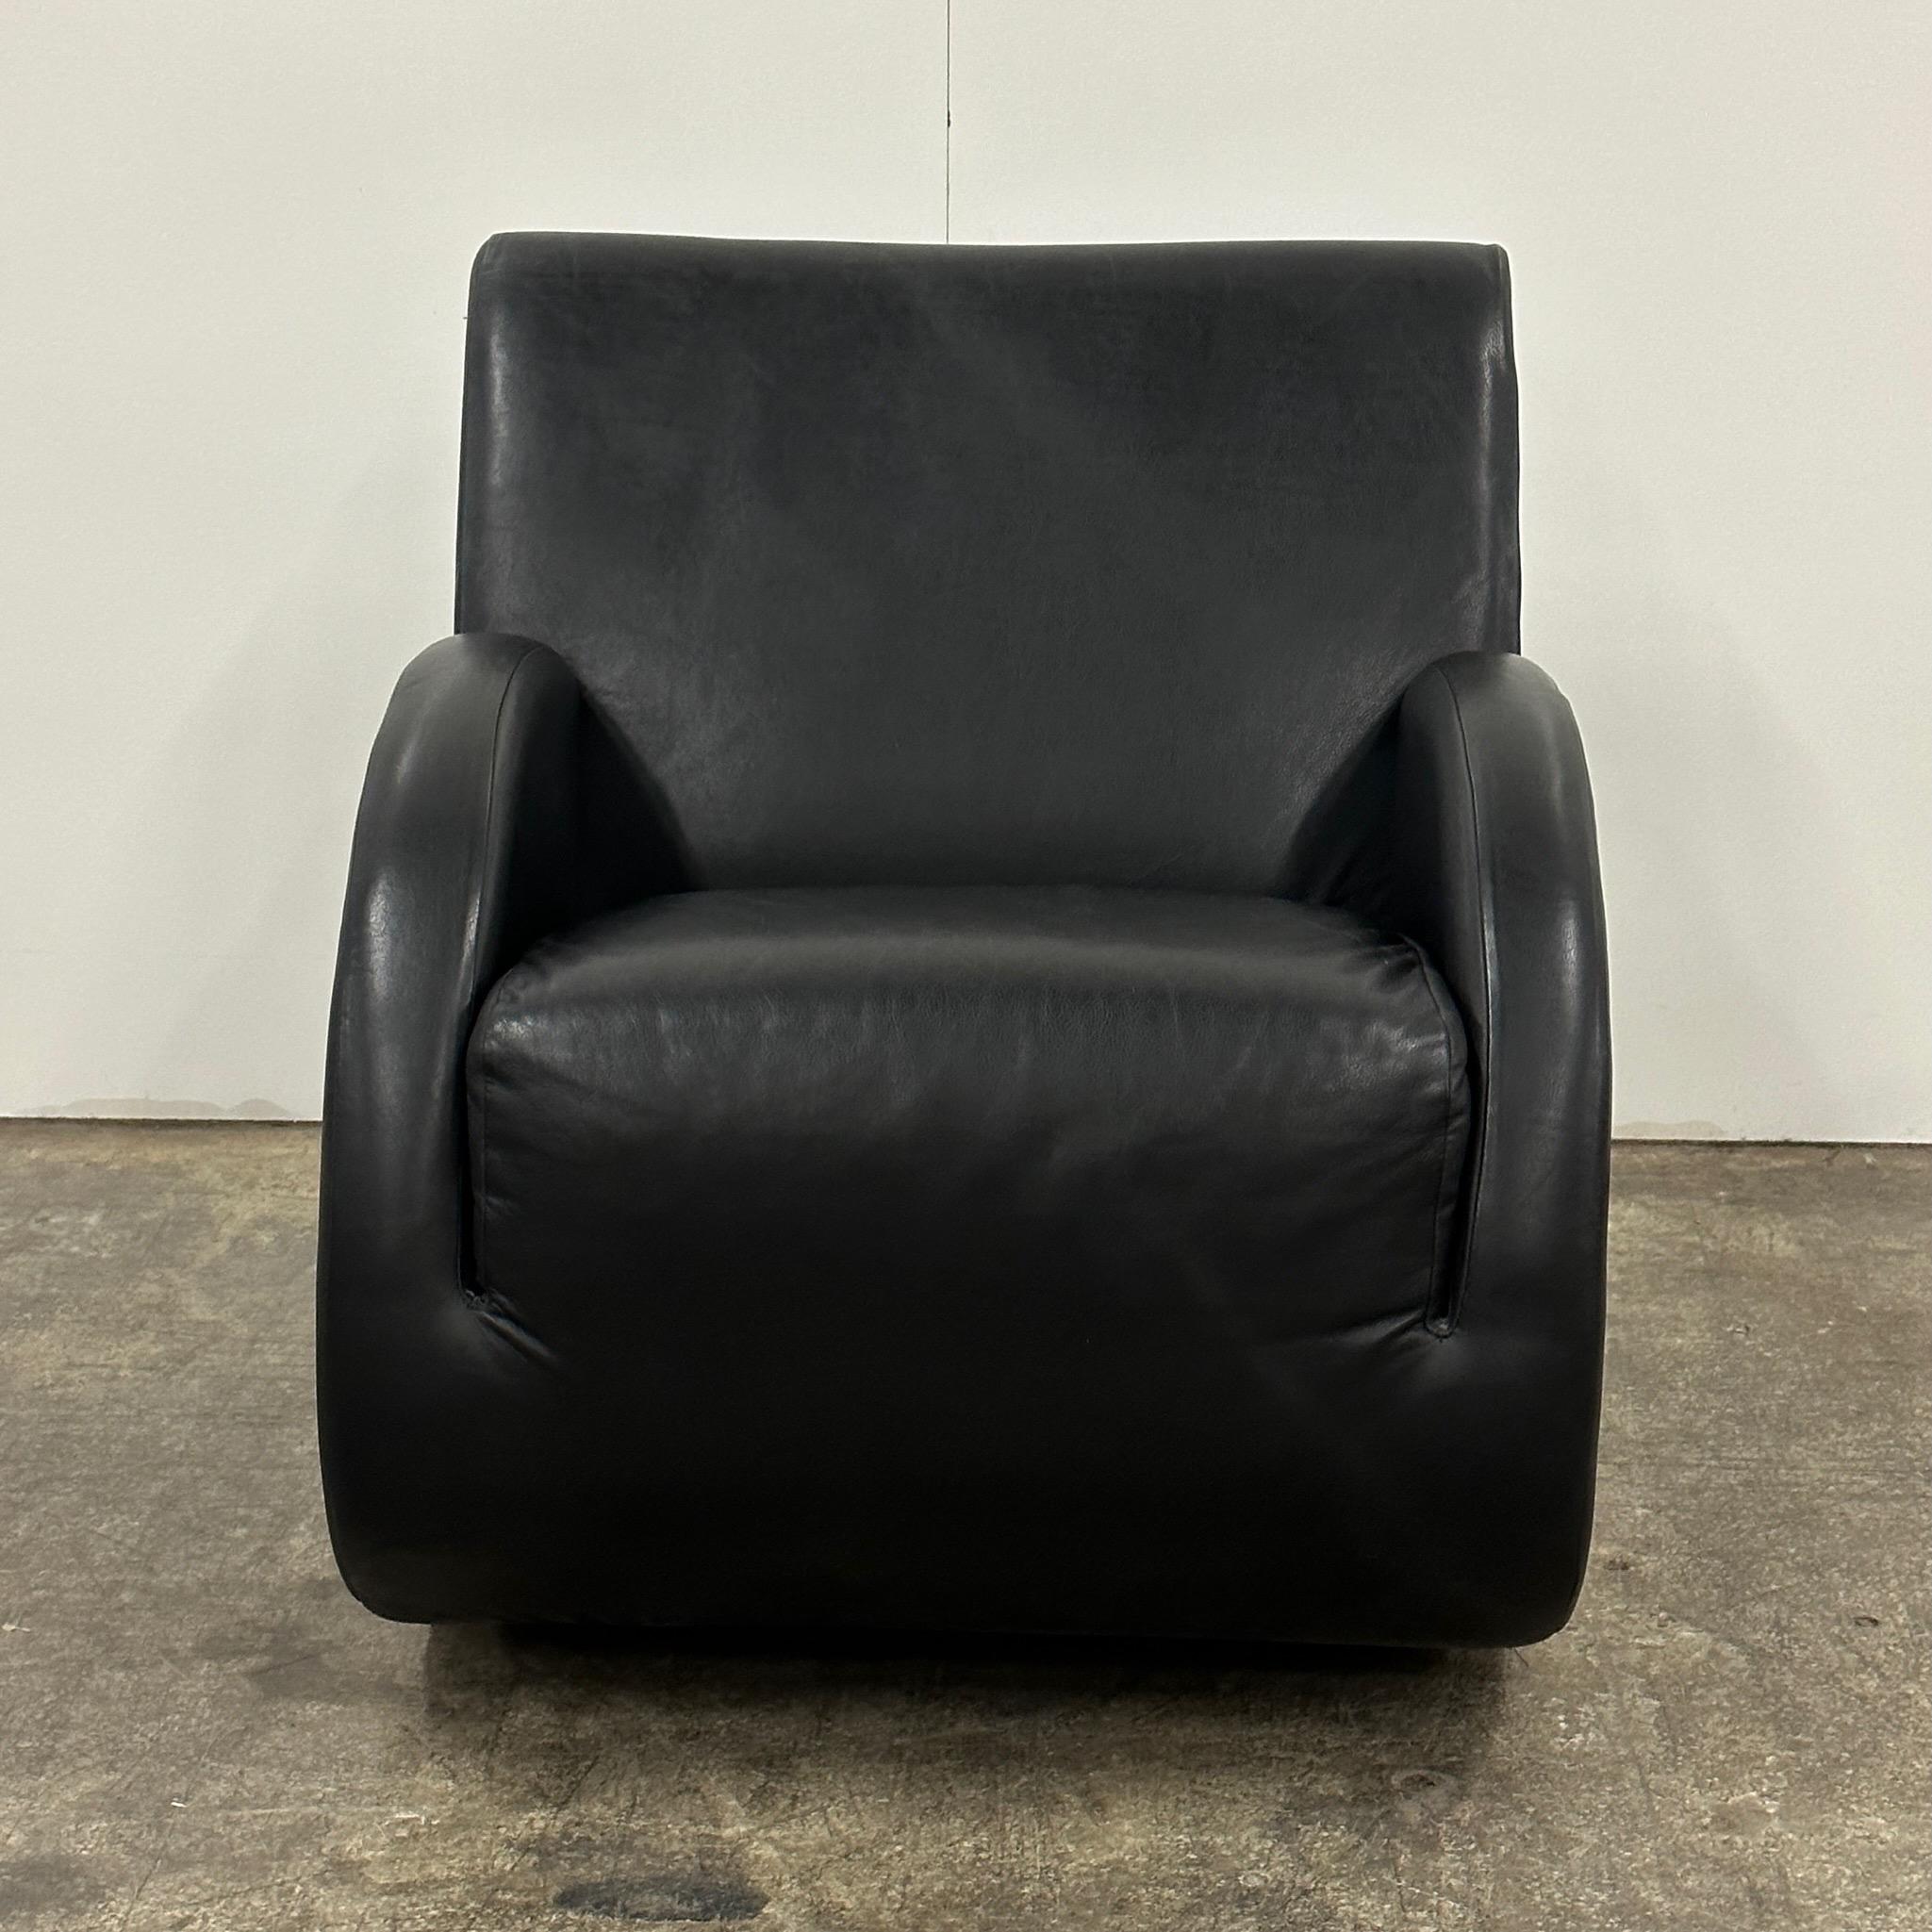 Late 20th Century Rockstar Chair by Vladimir Kagan for American Leather For Sale